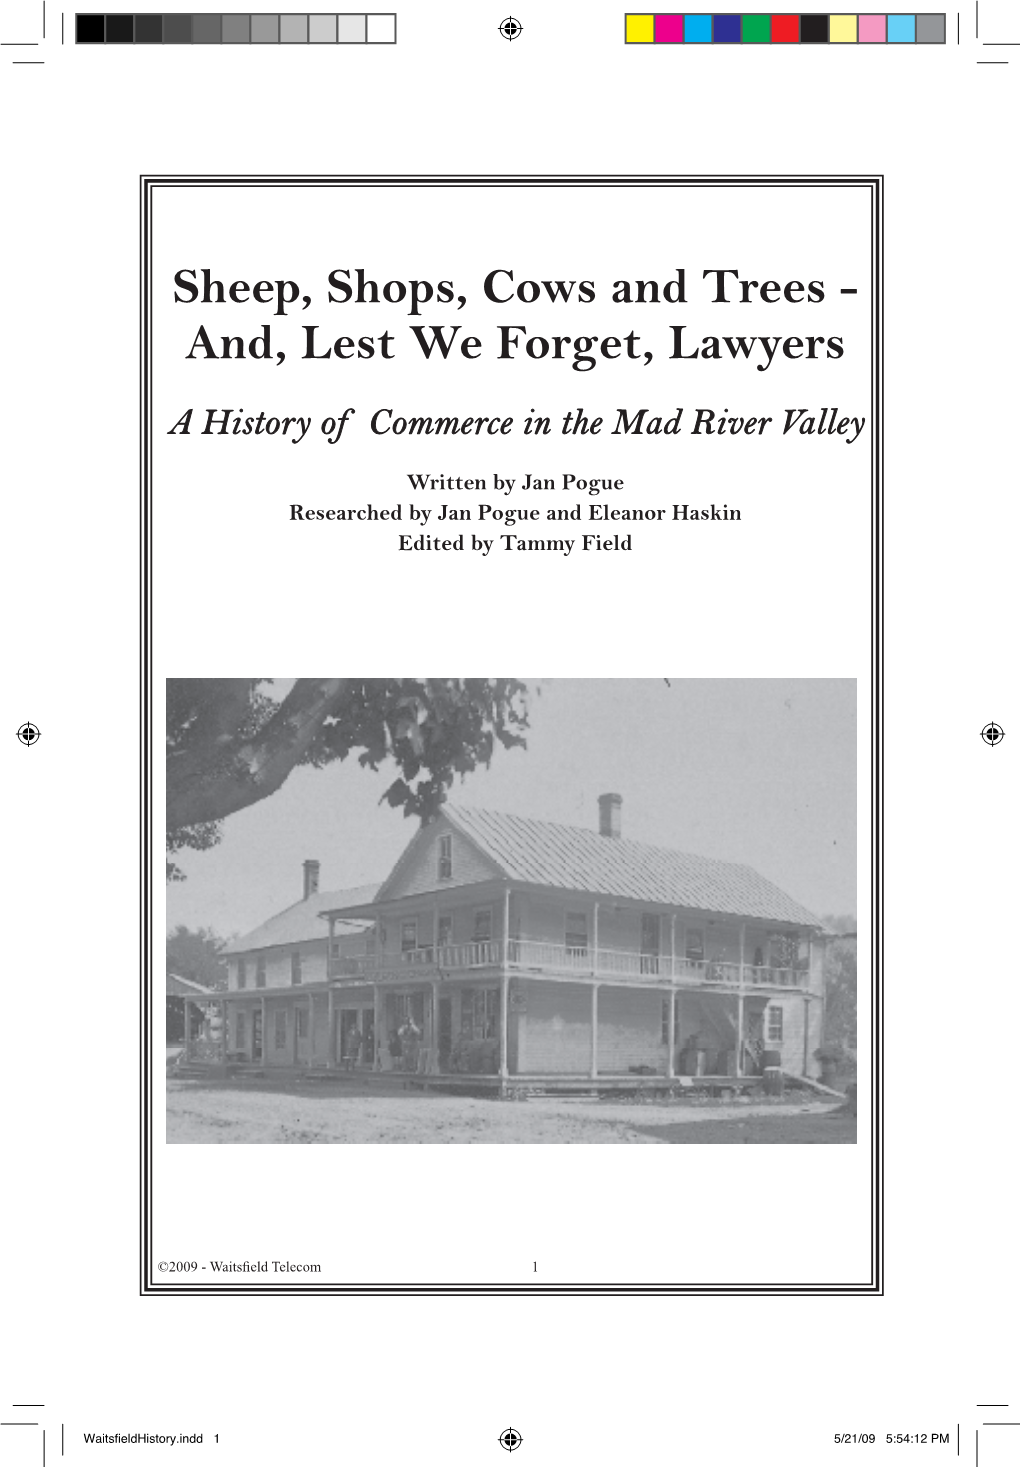 Sheep, Shops, Cows and Trees - And, Lest We Forget, Lawyers a History of Commerce in the Mad River Valley